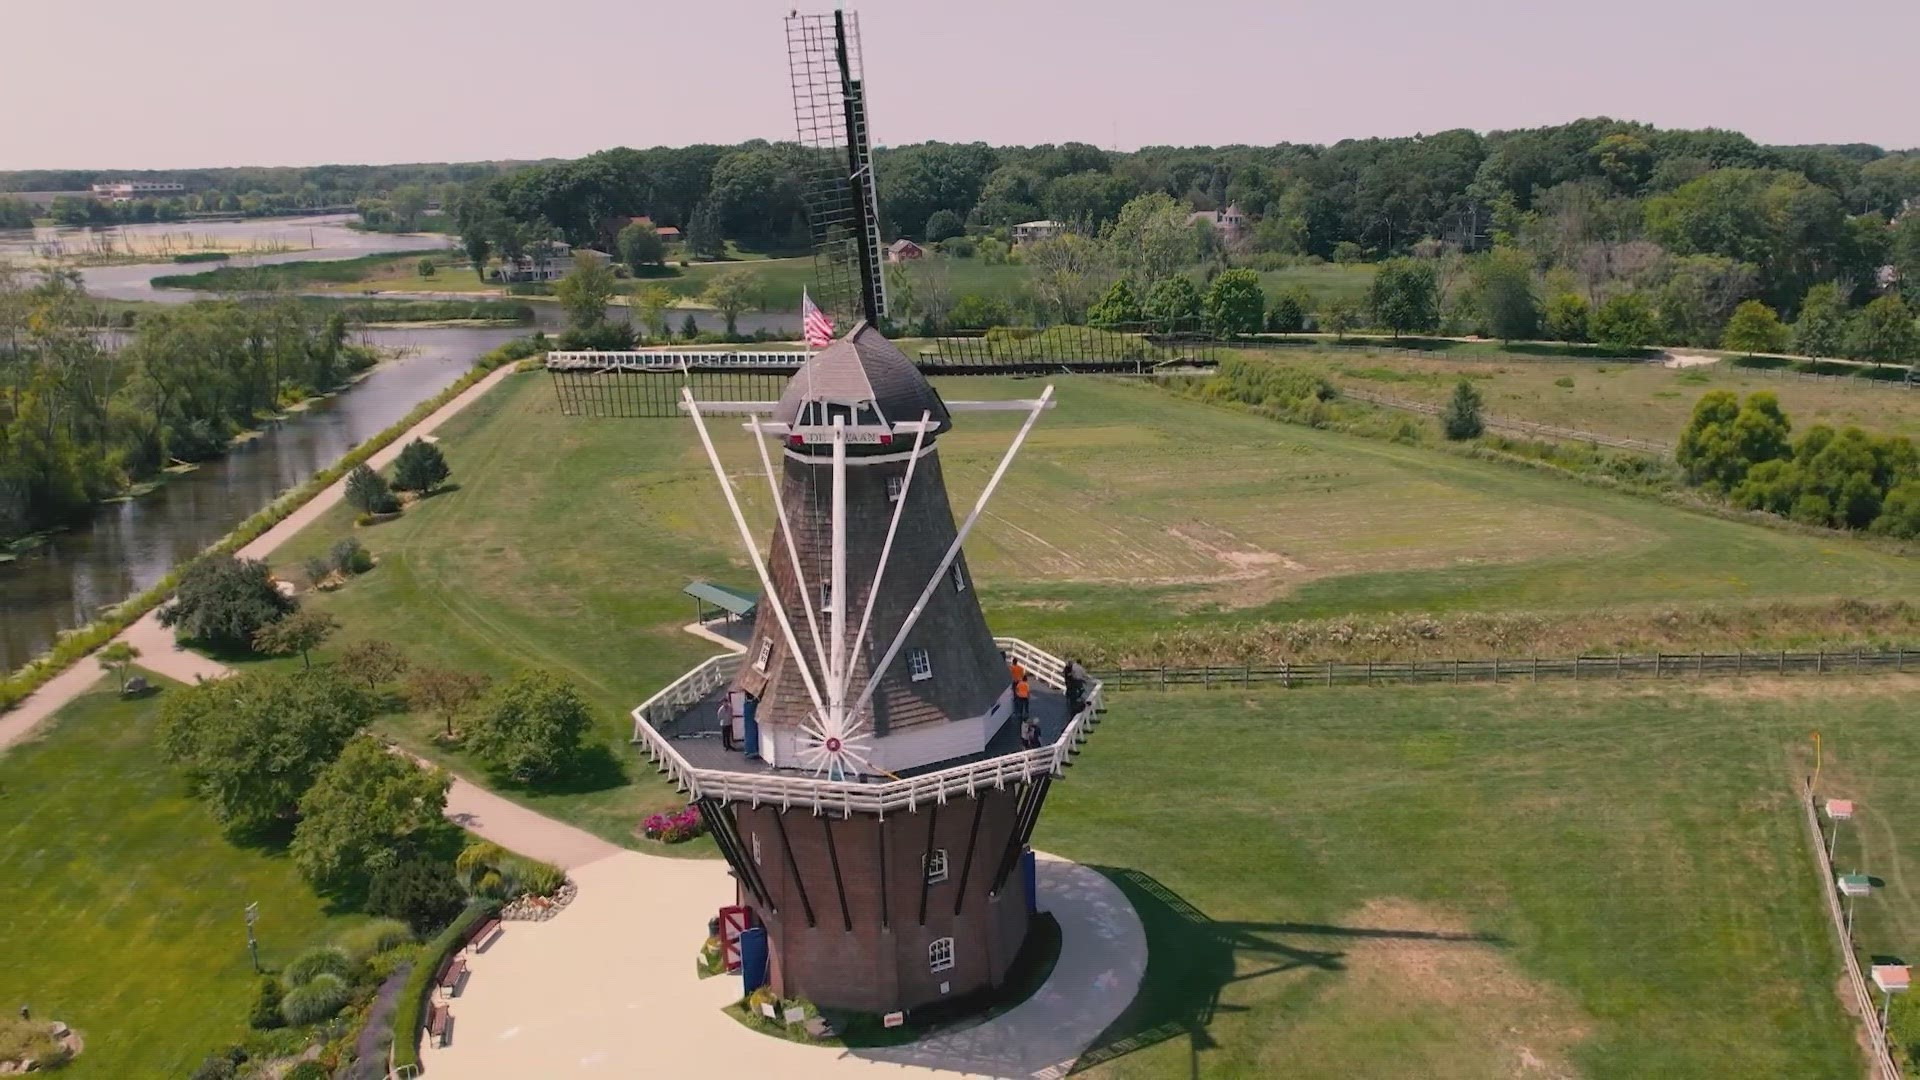 Windmill Island Gardens is a place to catch the best of Holland and is just 3 hours from Indianapolis.